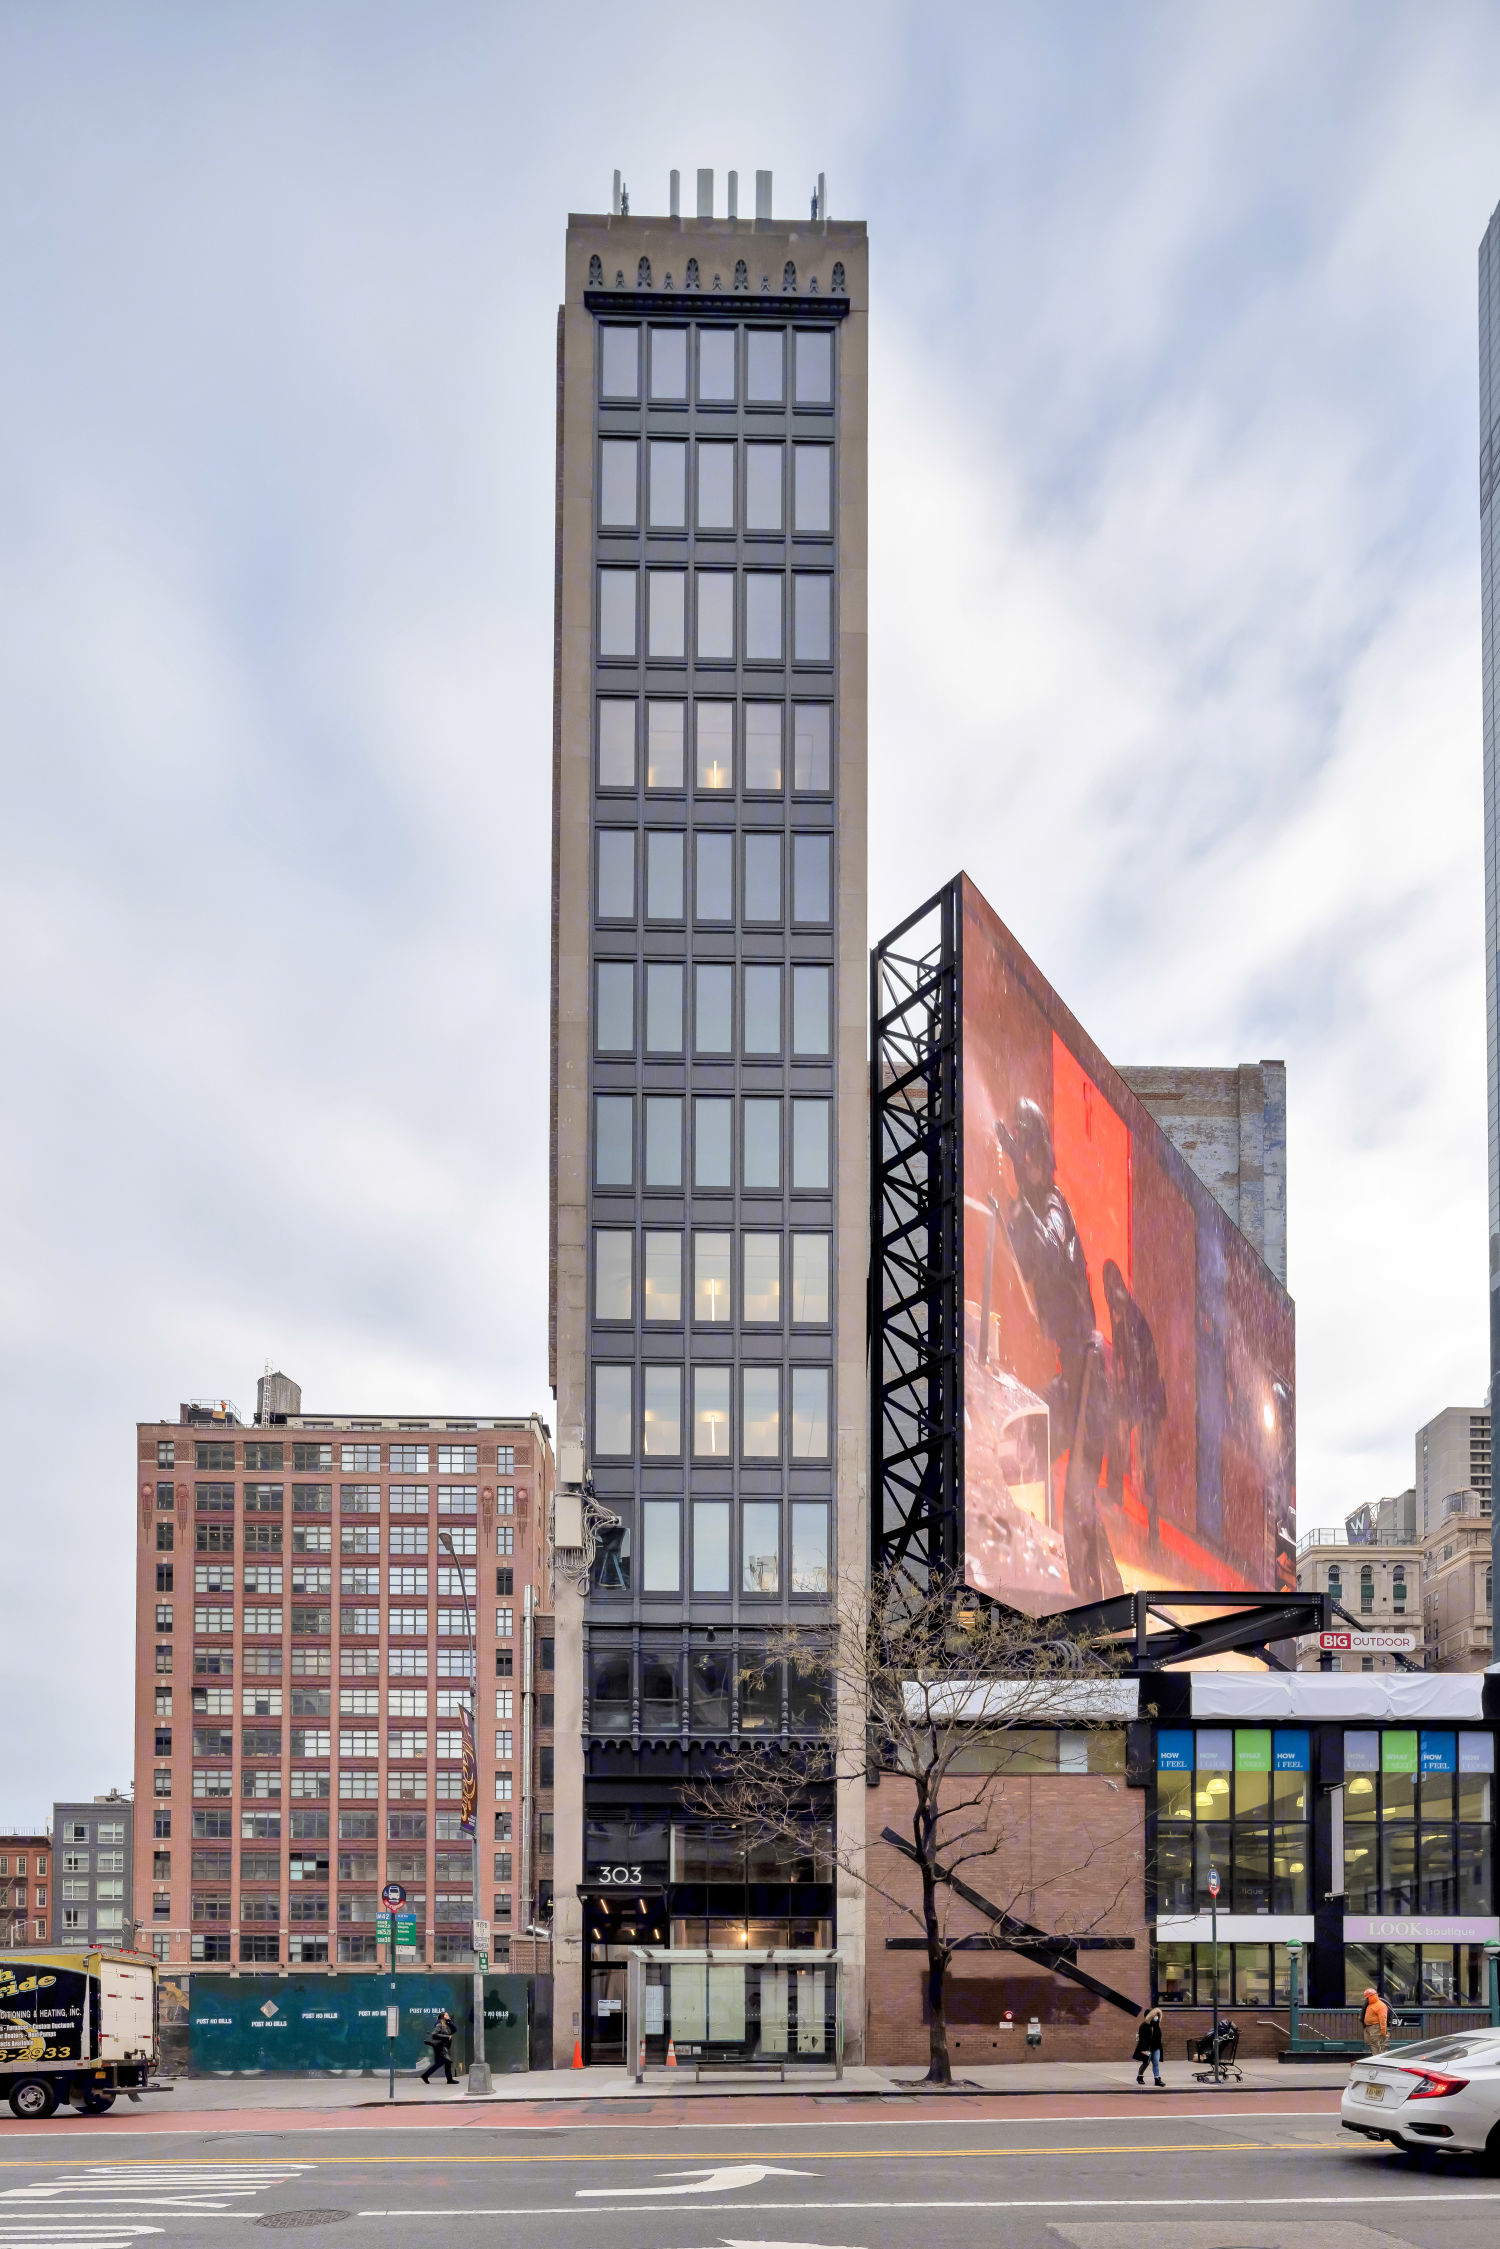 Hive42 - 303 West 42nd Street, New York, NY Commercial Space for 